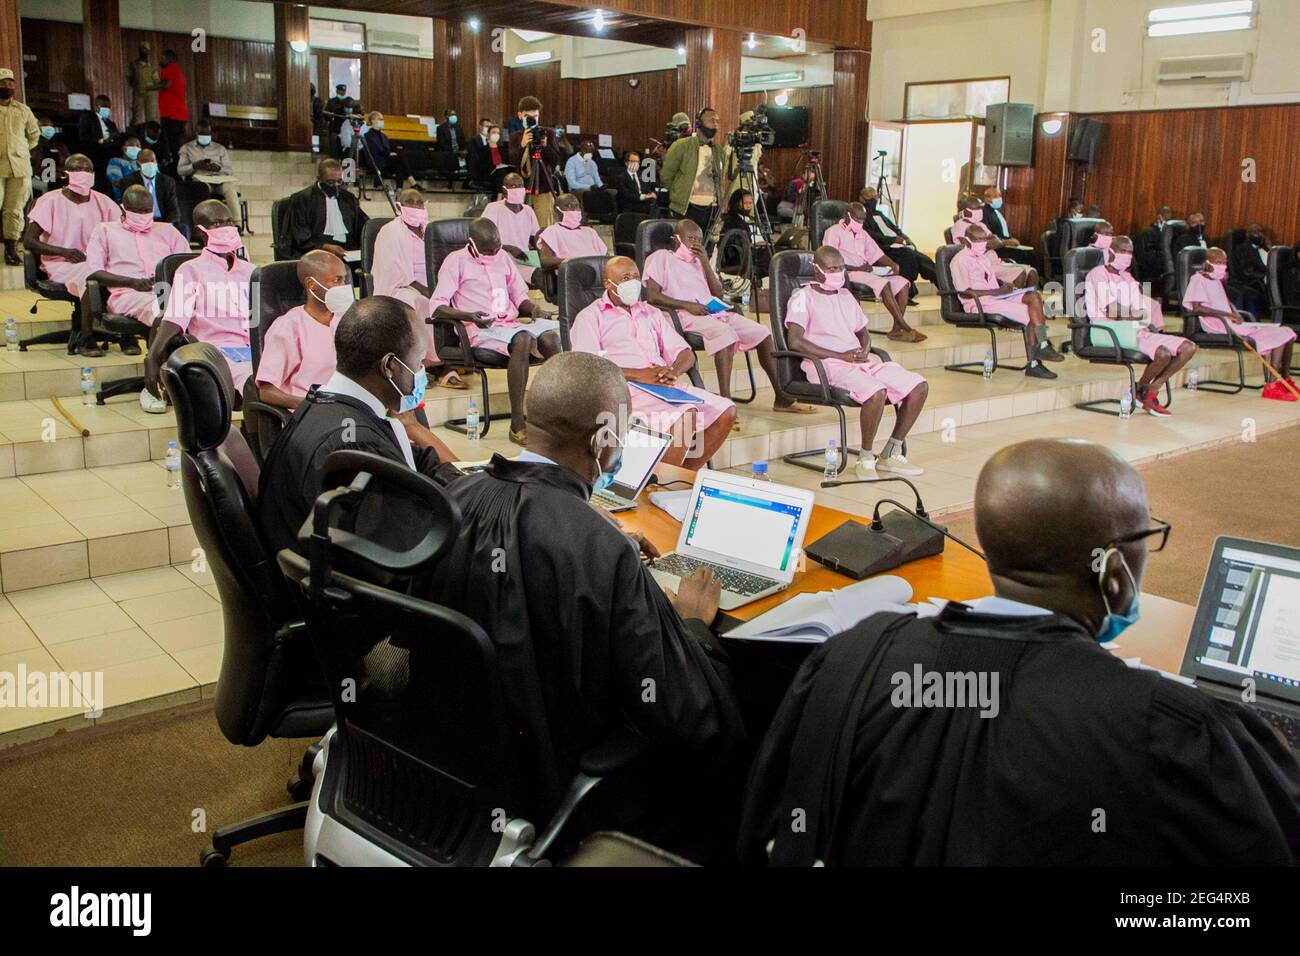 Kigali, Rwanda. 17th Feb, 2021. Paul Rusesabagina and other co-accused wait in a courtroom in Kigali, Rwanda, on Feb. 17, 2021. Rwanda's high court on Wednesday started trial against Paul Rusesabagina, portrayed as a humanitarian activist in the controversial Oscar-nominated film 'Hotel Rwanda,' for 13 charges including terrorism, financing terrorism and forming armed groups. Credit: Cyril Ndegeya/Xinhua/Alamy Live News Stock Photo